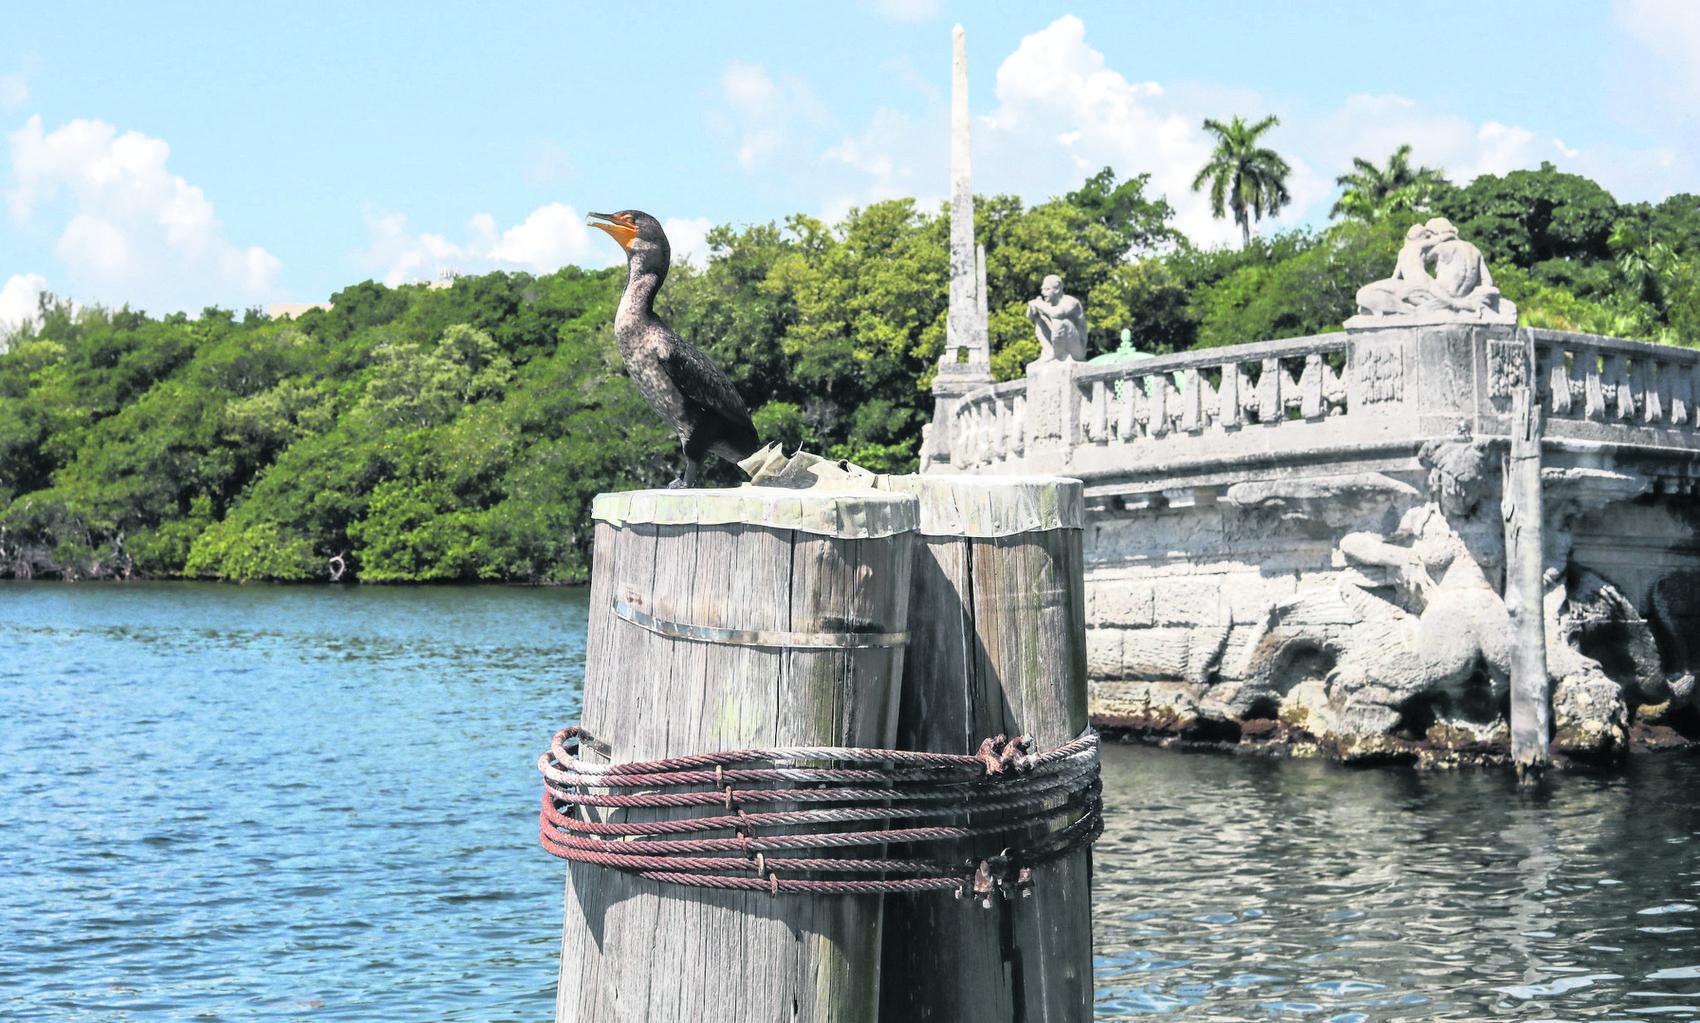 Vizcaya Museums and Gardens is a bayfront property that sits about four feet above sea level. Pieces of the stone and concrete barge in front of the property were swept into Biscayne Bay during Hurricane Irma in 2017.  The barge has since been restored to its historical state.